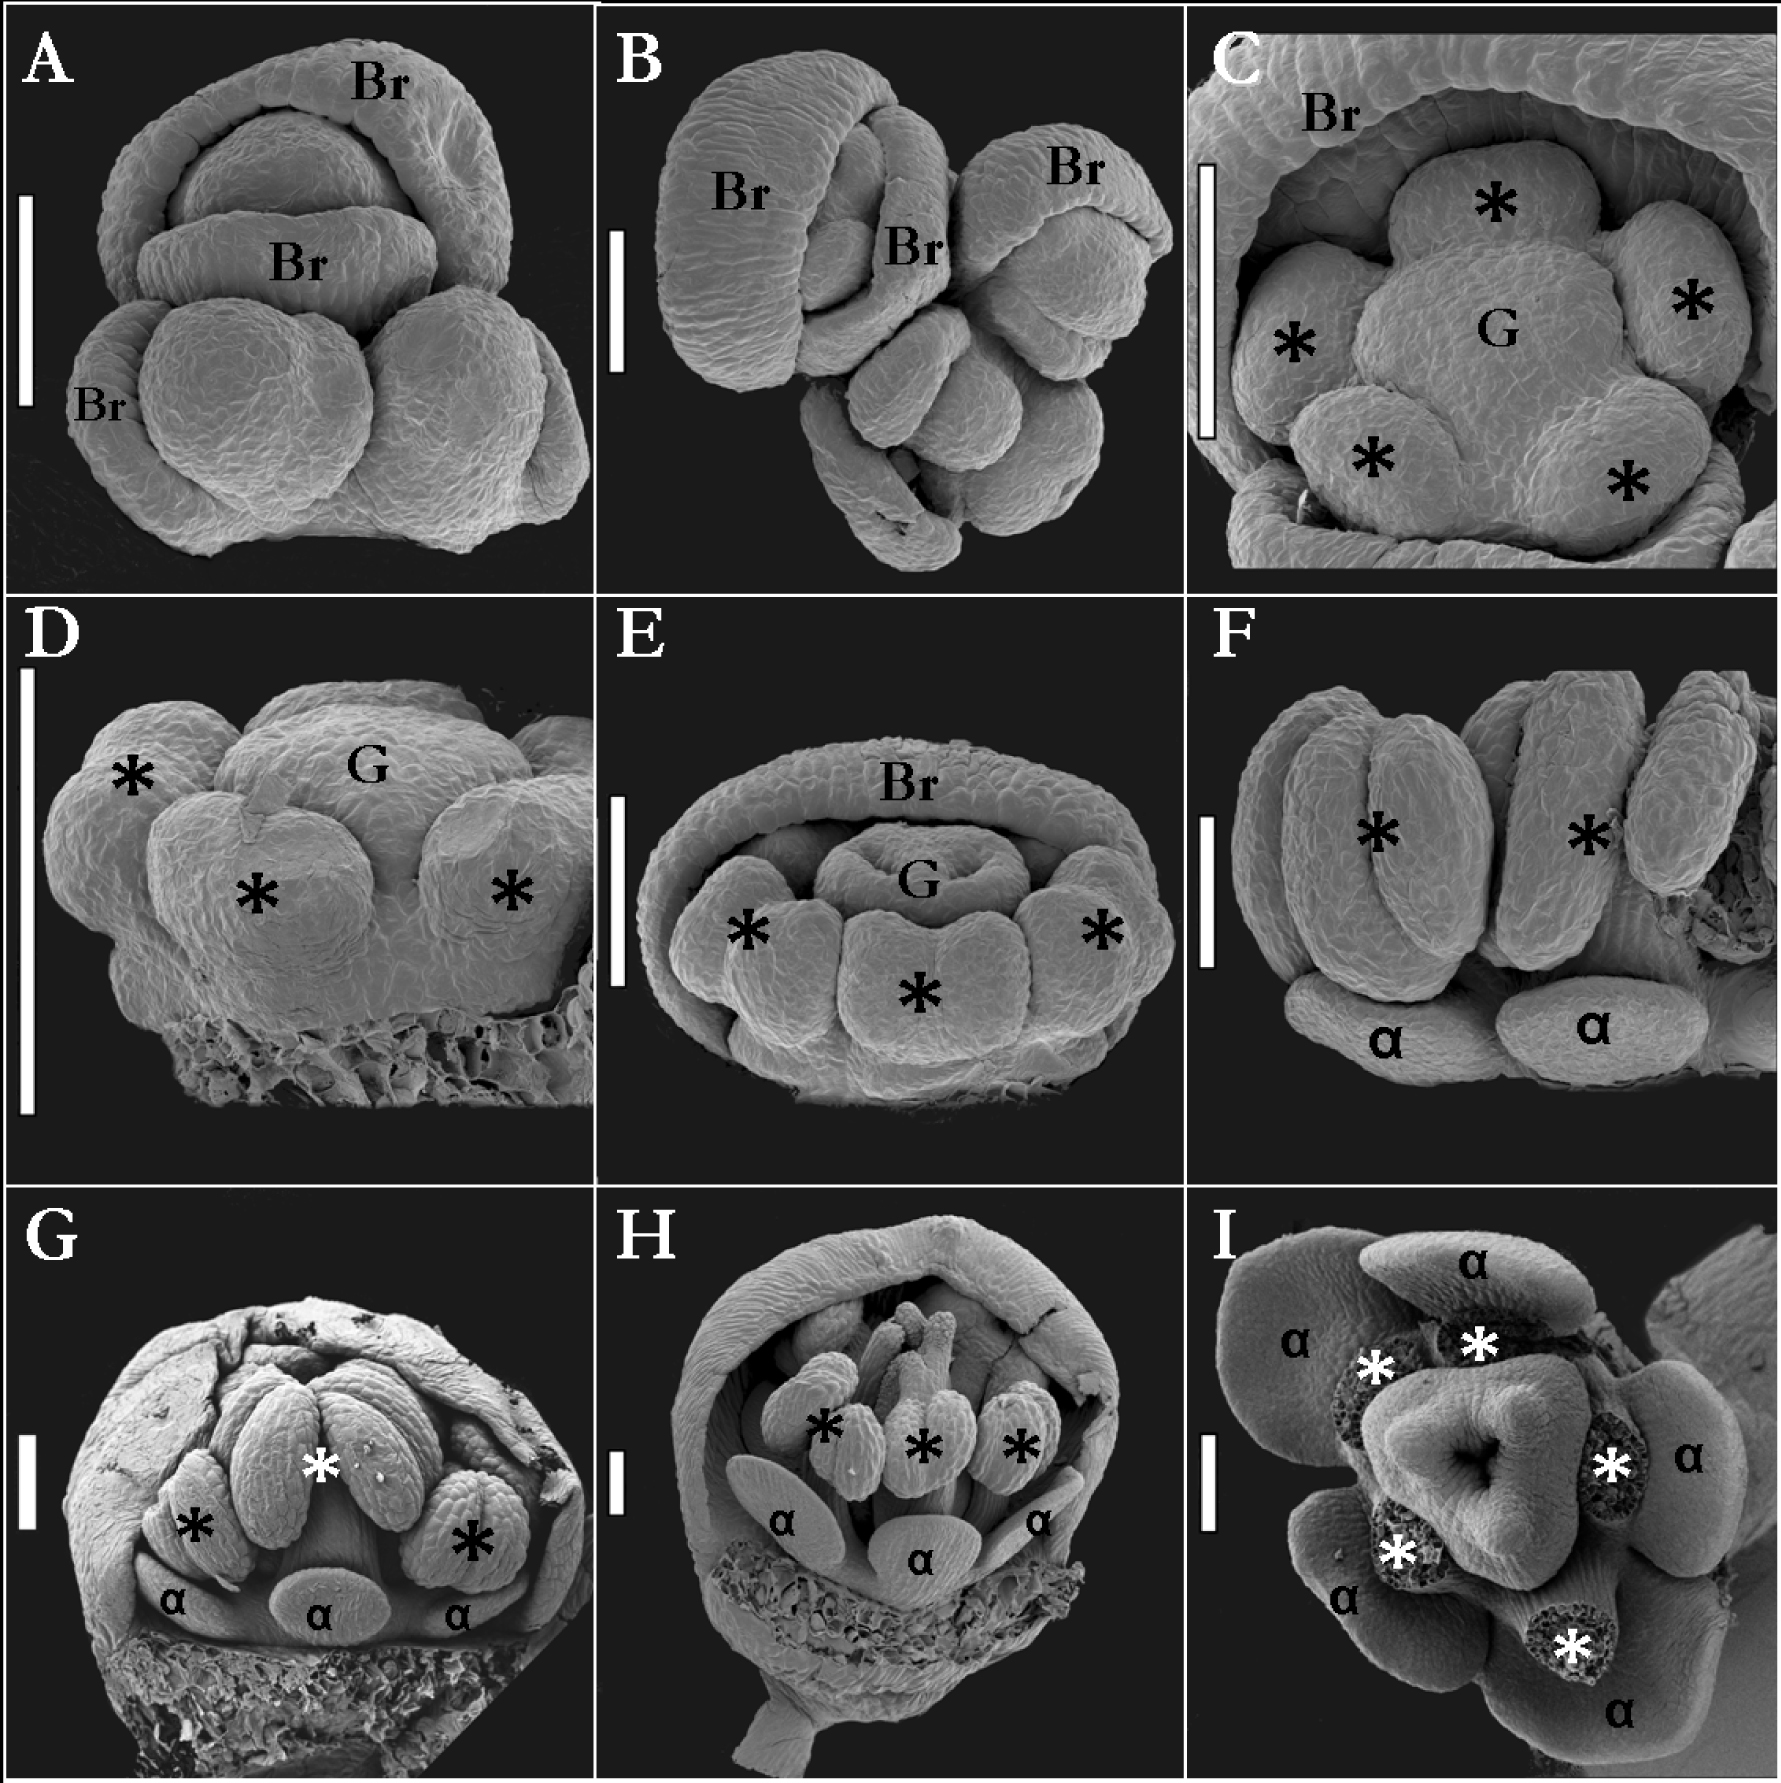 Fig. 1. Claytonia sibirica (A-F and I) and Claytonia perfoliata (G-H) SEM figure plate. A-B – inflorescence; C-D – stamen and carpel early development; E-G – petaloid initiation from the base of the stamens; H-I – growth of petaloids and full developed flower. (White bar A–I = 100µm). Br = bracteoles; α = petaloids; ✴ = stamens and stamen primordia; G = gynoecium and gynoecium primordium.